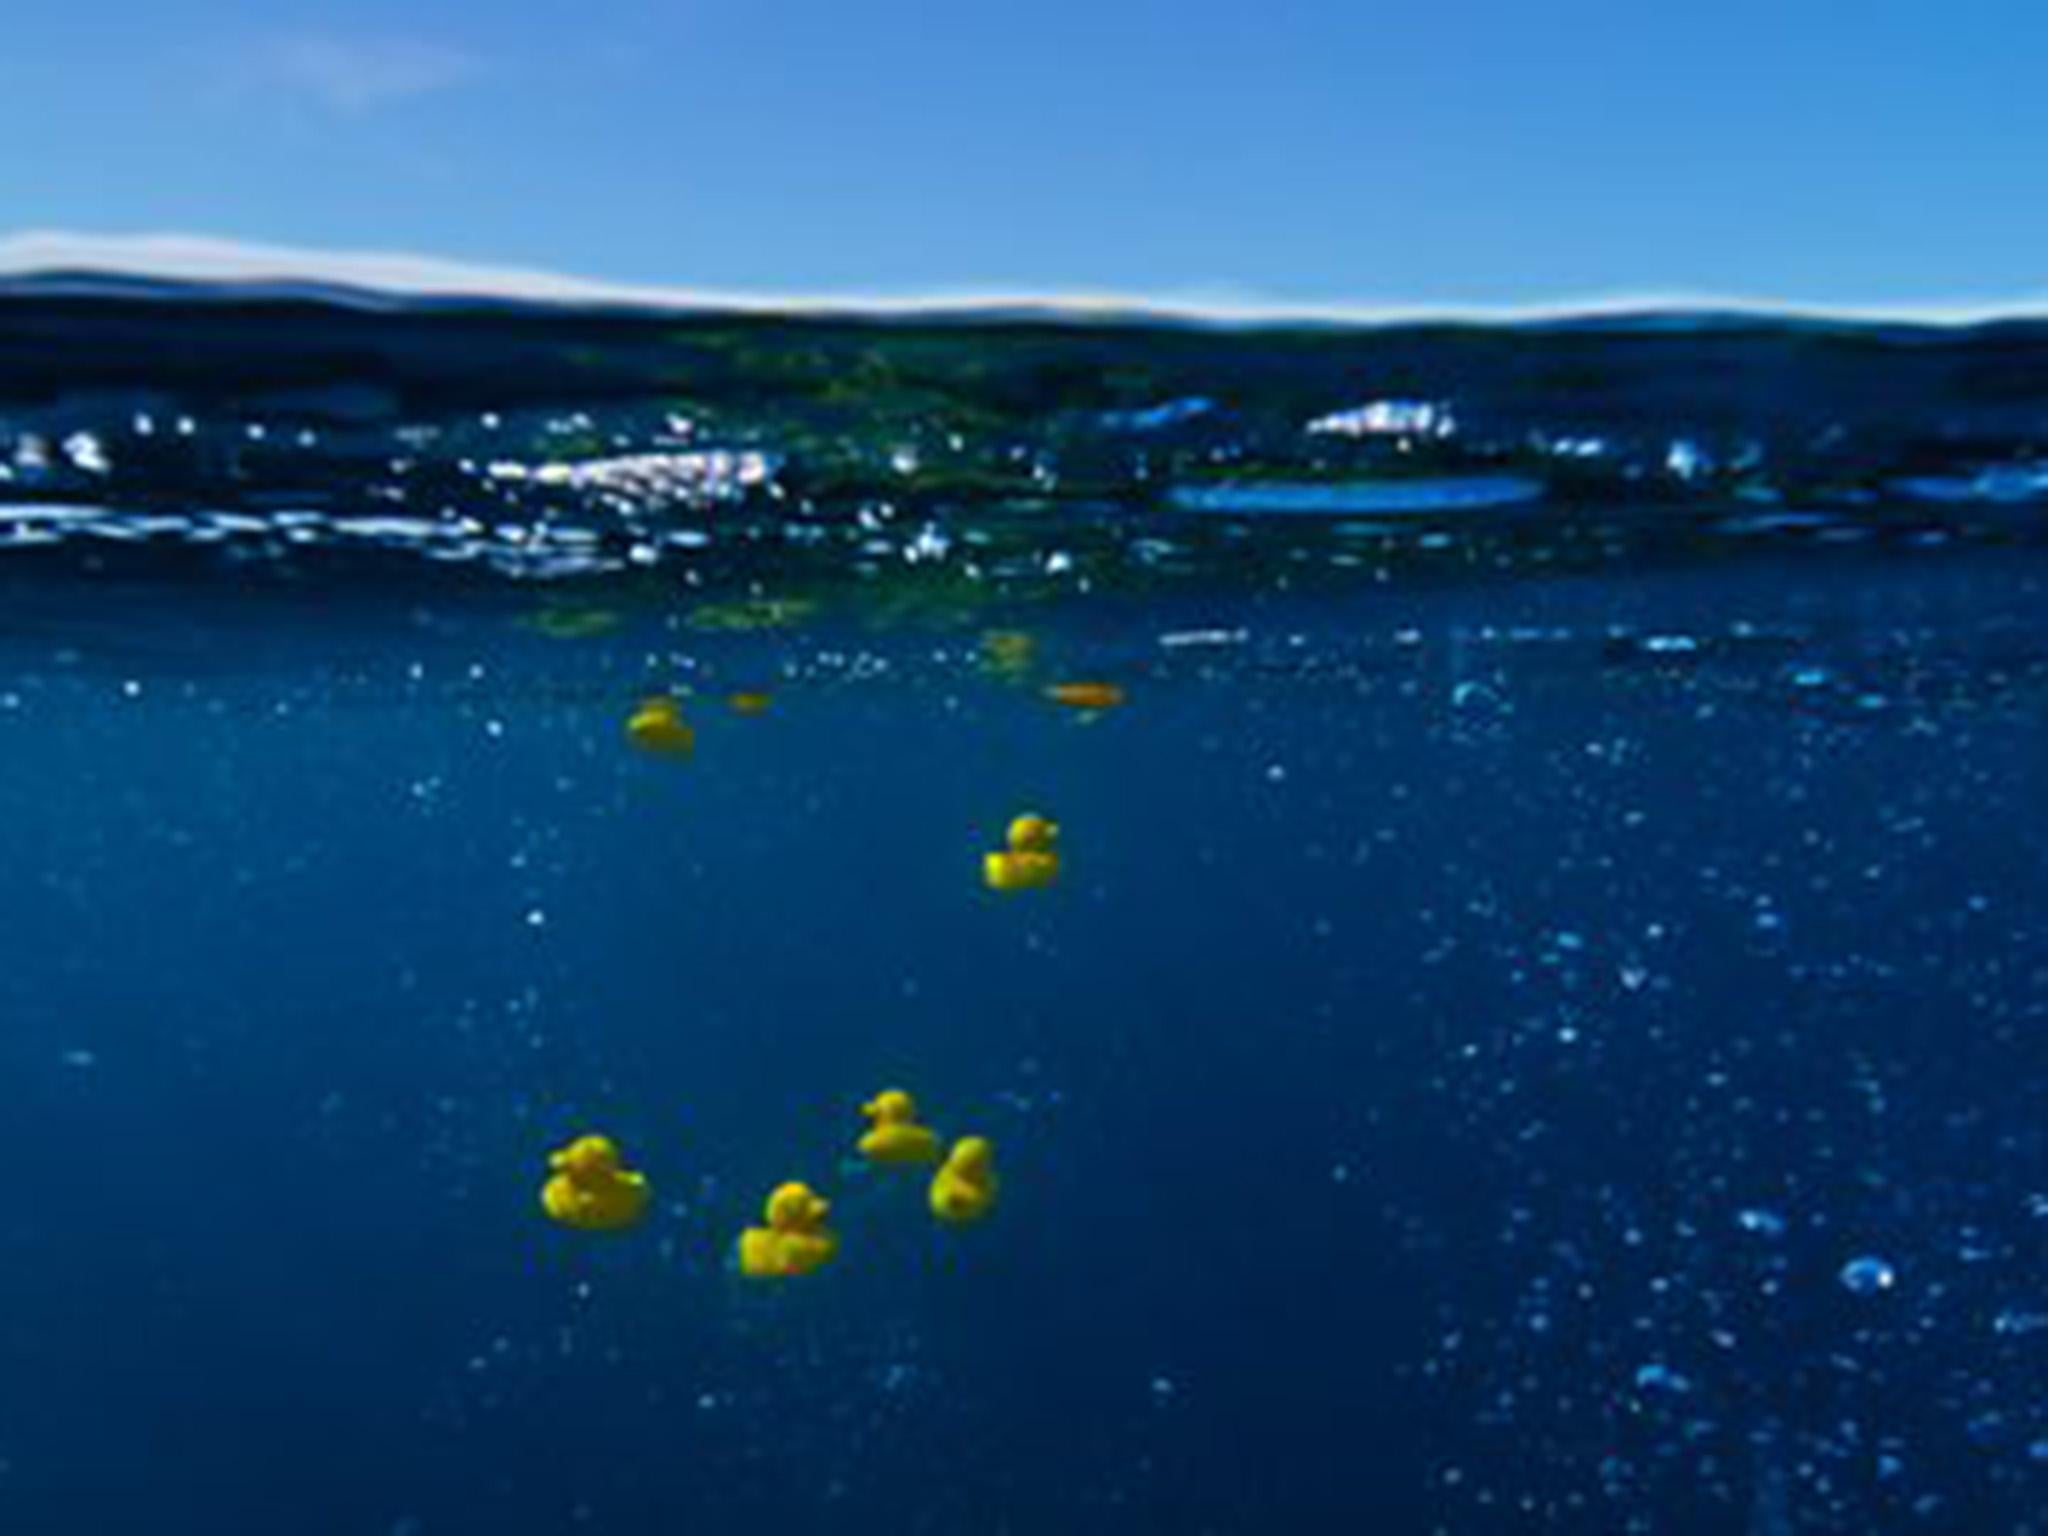 Duckgate?: Producers released 250 plastic toys into the ocean – but say they collected every single one after filming